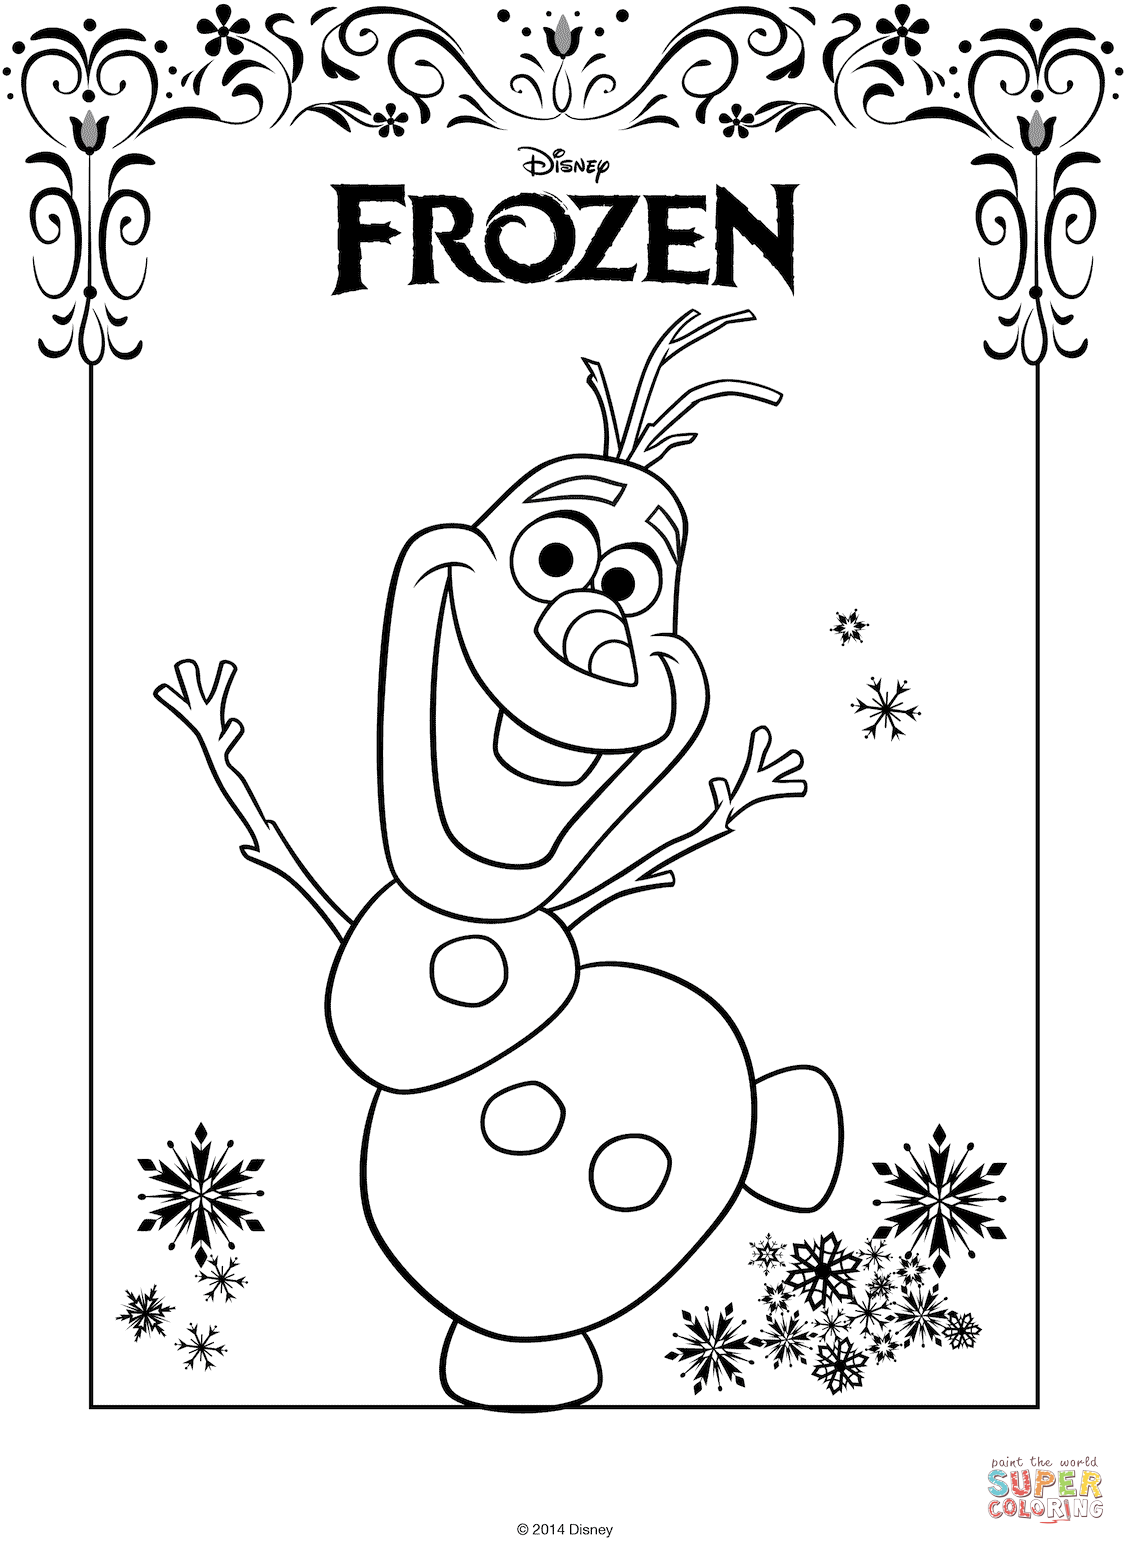 Olaf from Frozen coloring page | Free Printable Coloring Pages